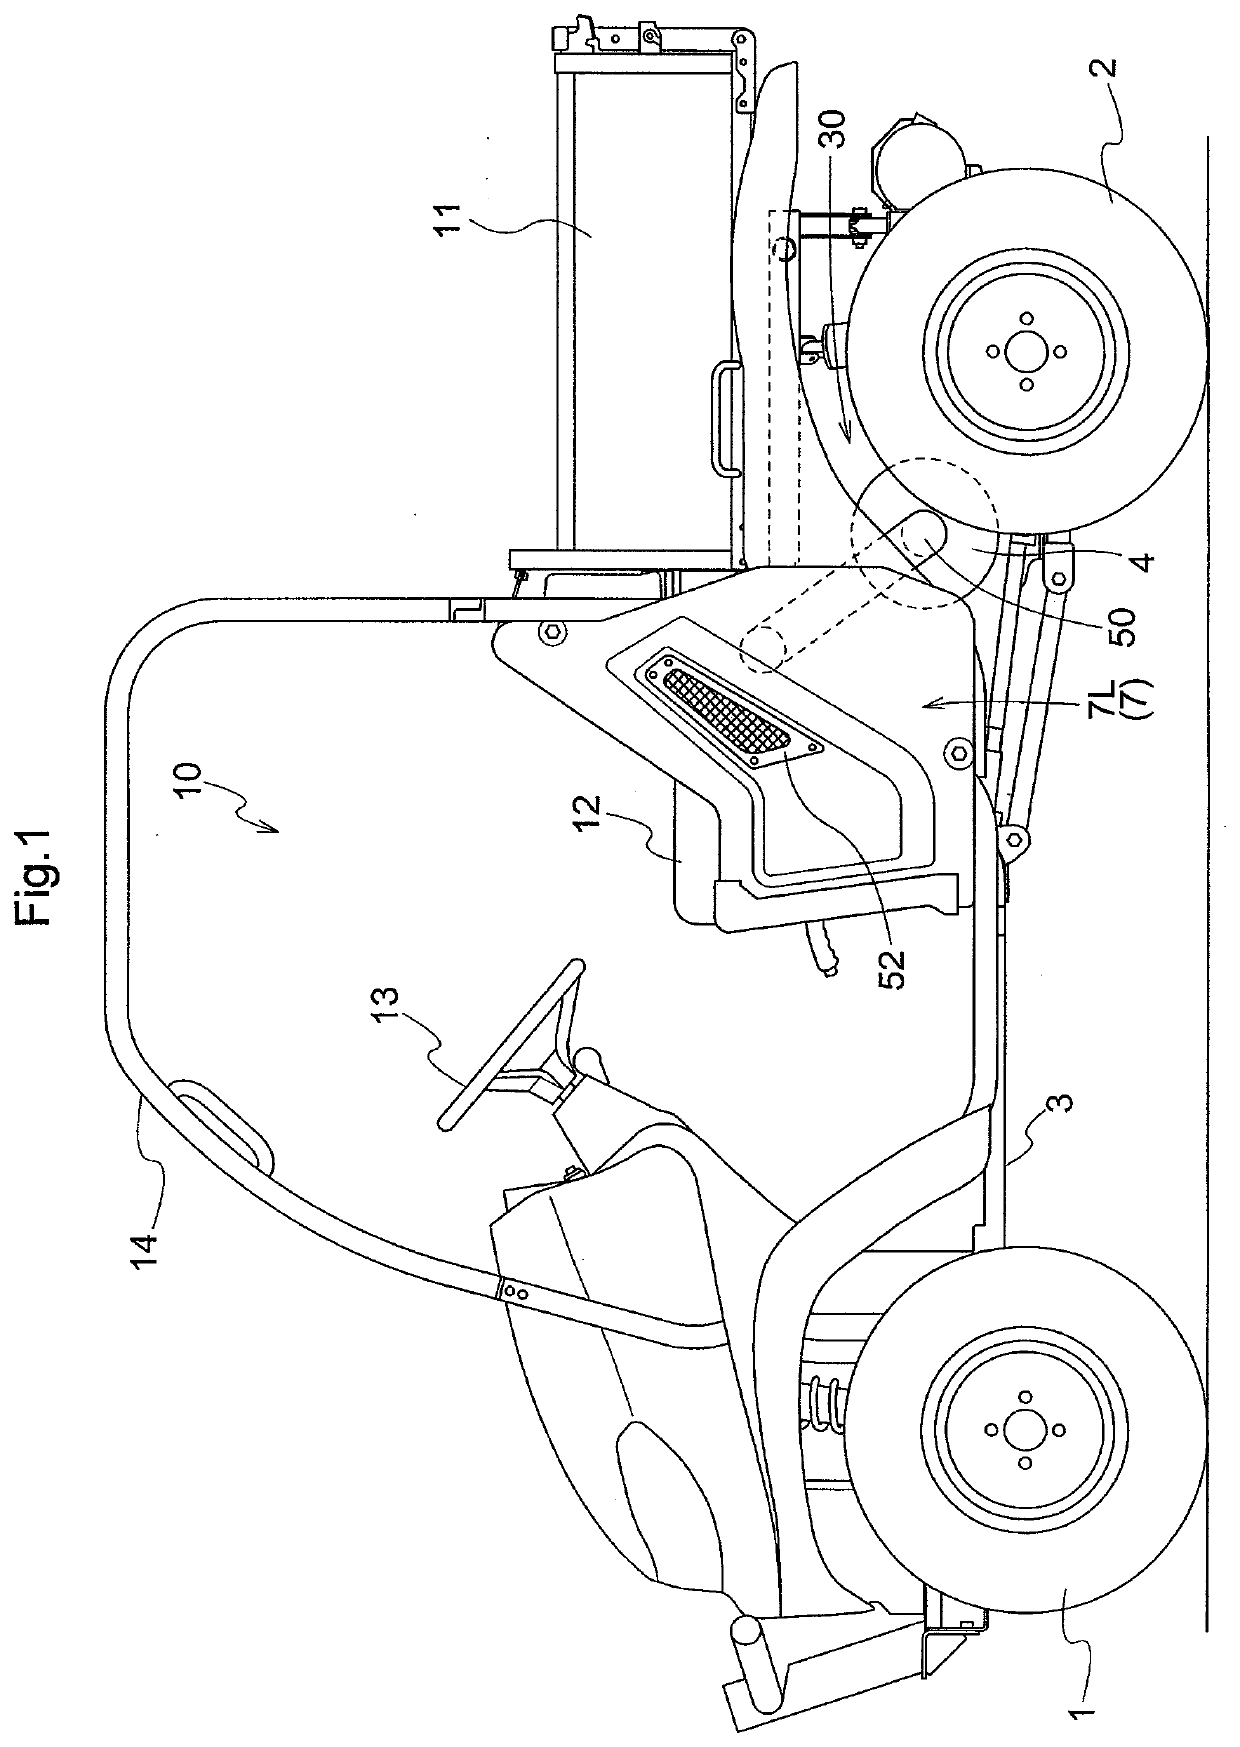 Utility vehicle having continuously variable transmission